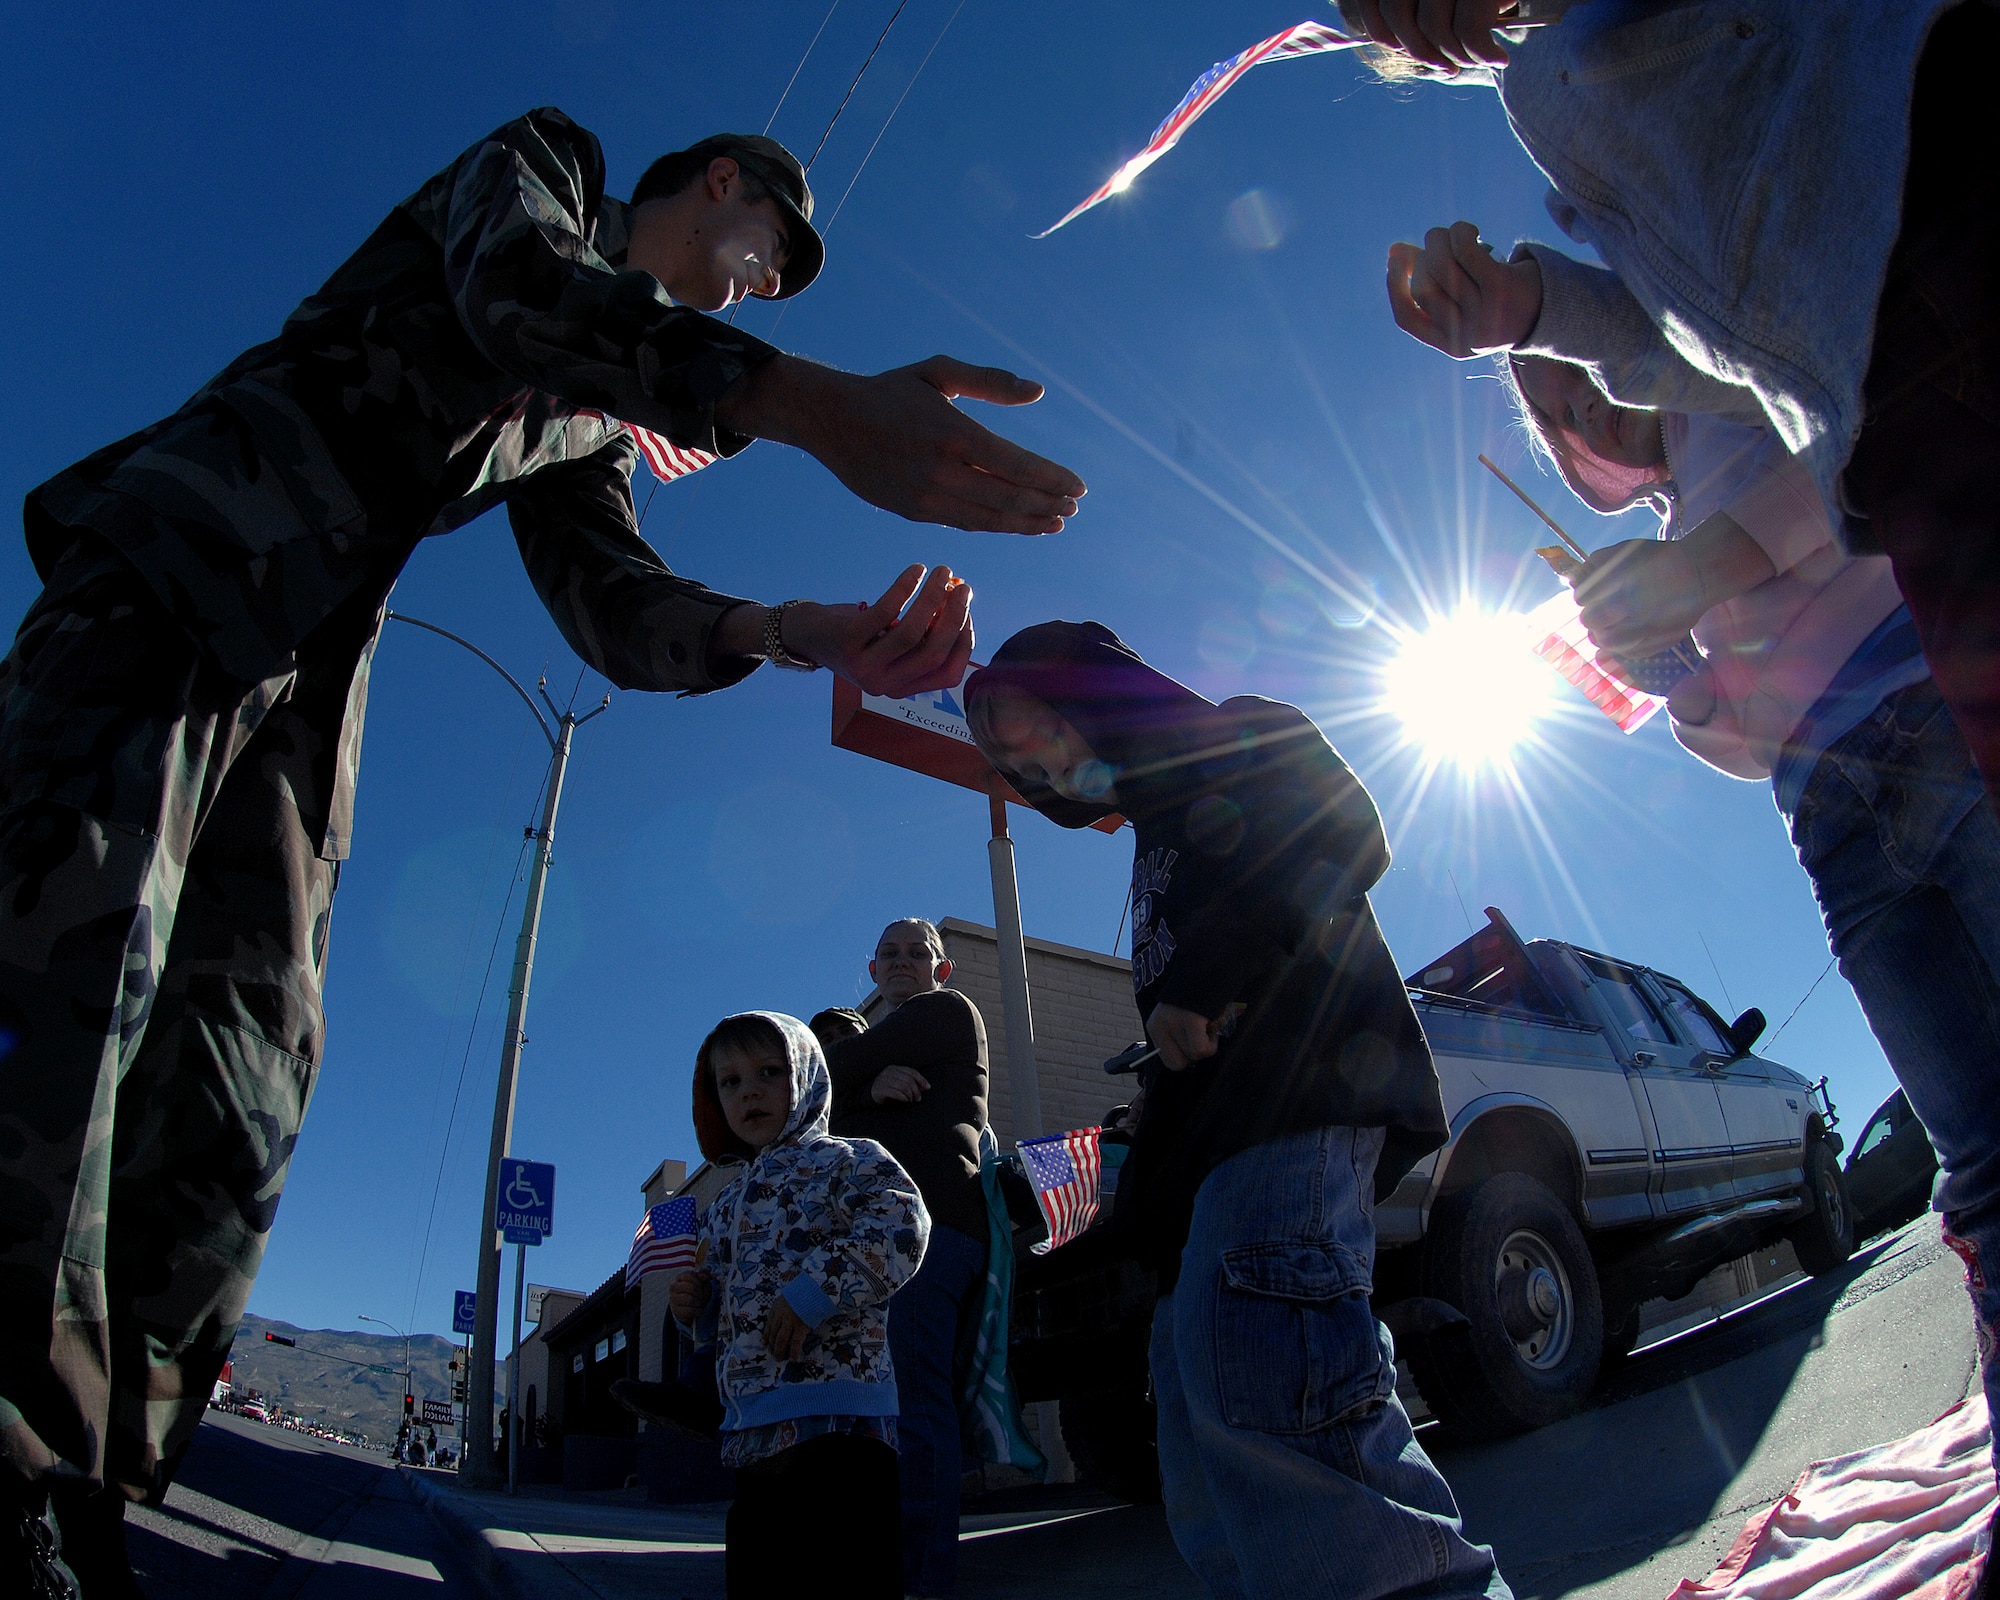 Airman 1st Class Collier Buffington, 49th Logisitics Readiness Squadron, Holloman Air Force Base, N.M., passes out candy to children during the Veterans Day parade Nov. 8, in Alamogordo, N.M. The Veterans Day National Ceremony is held Nov. 11 each year at Arlington National Cemetery.



(U.S. Air Force photo/ Senior Airman Anthony Nelson)
